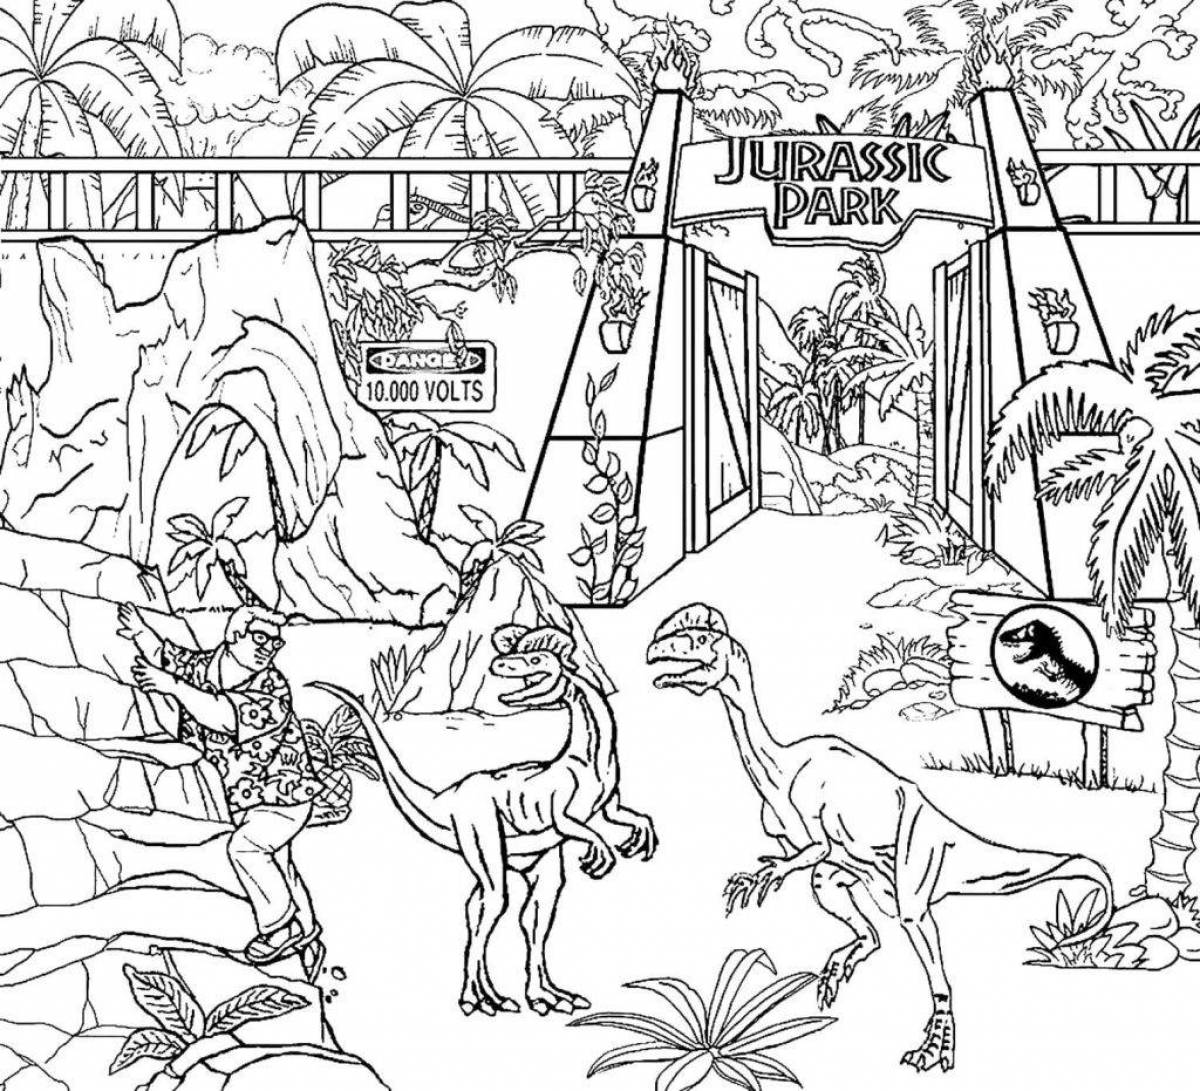 Dazzling Jurassic Park Coloring Page